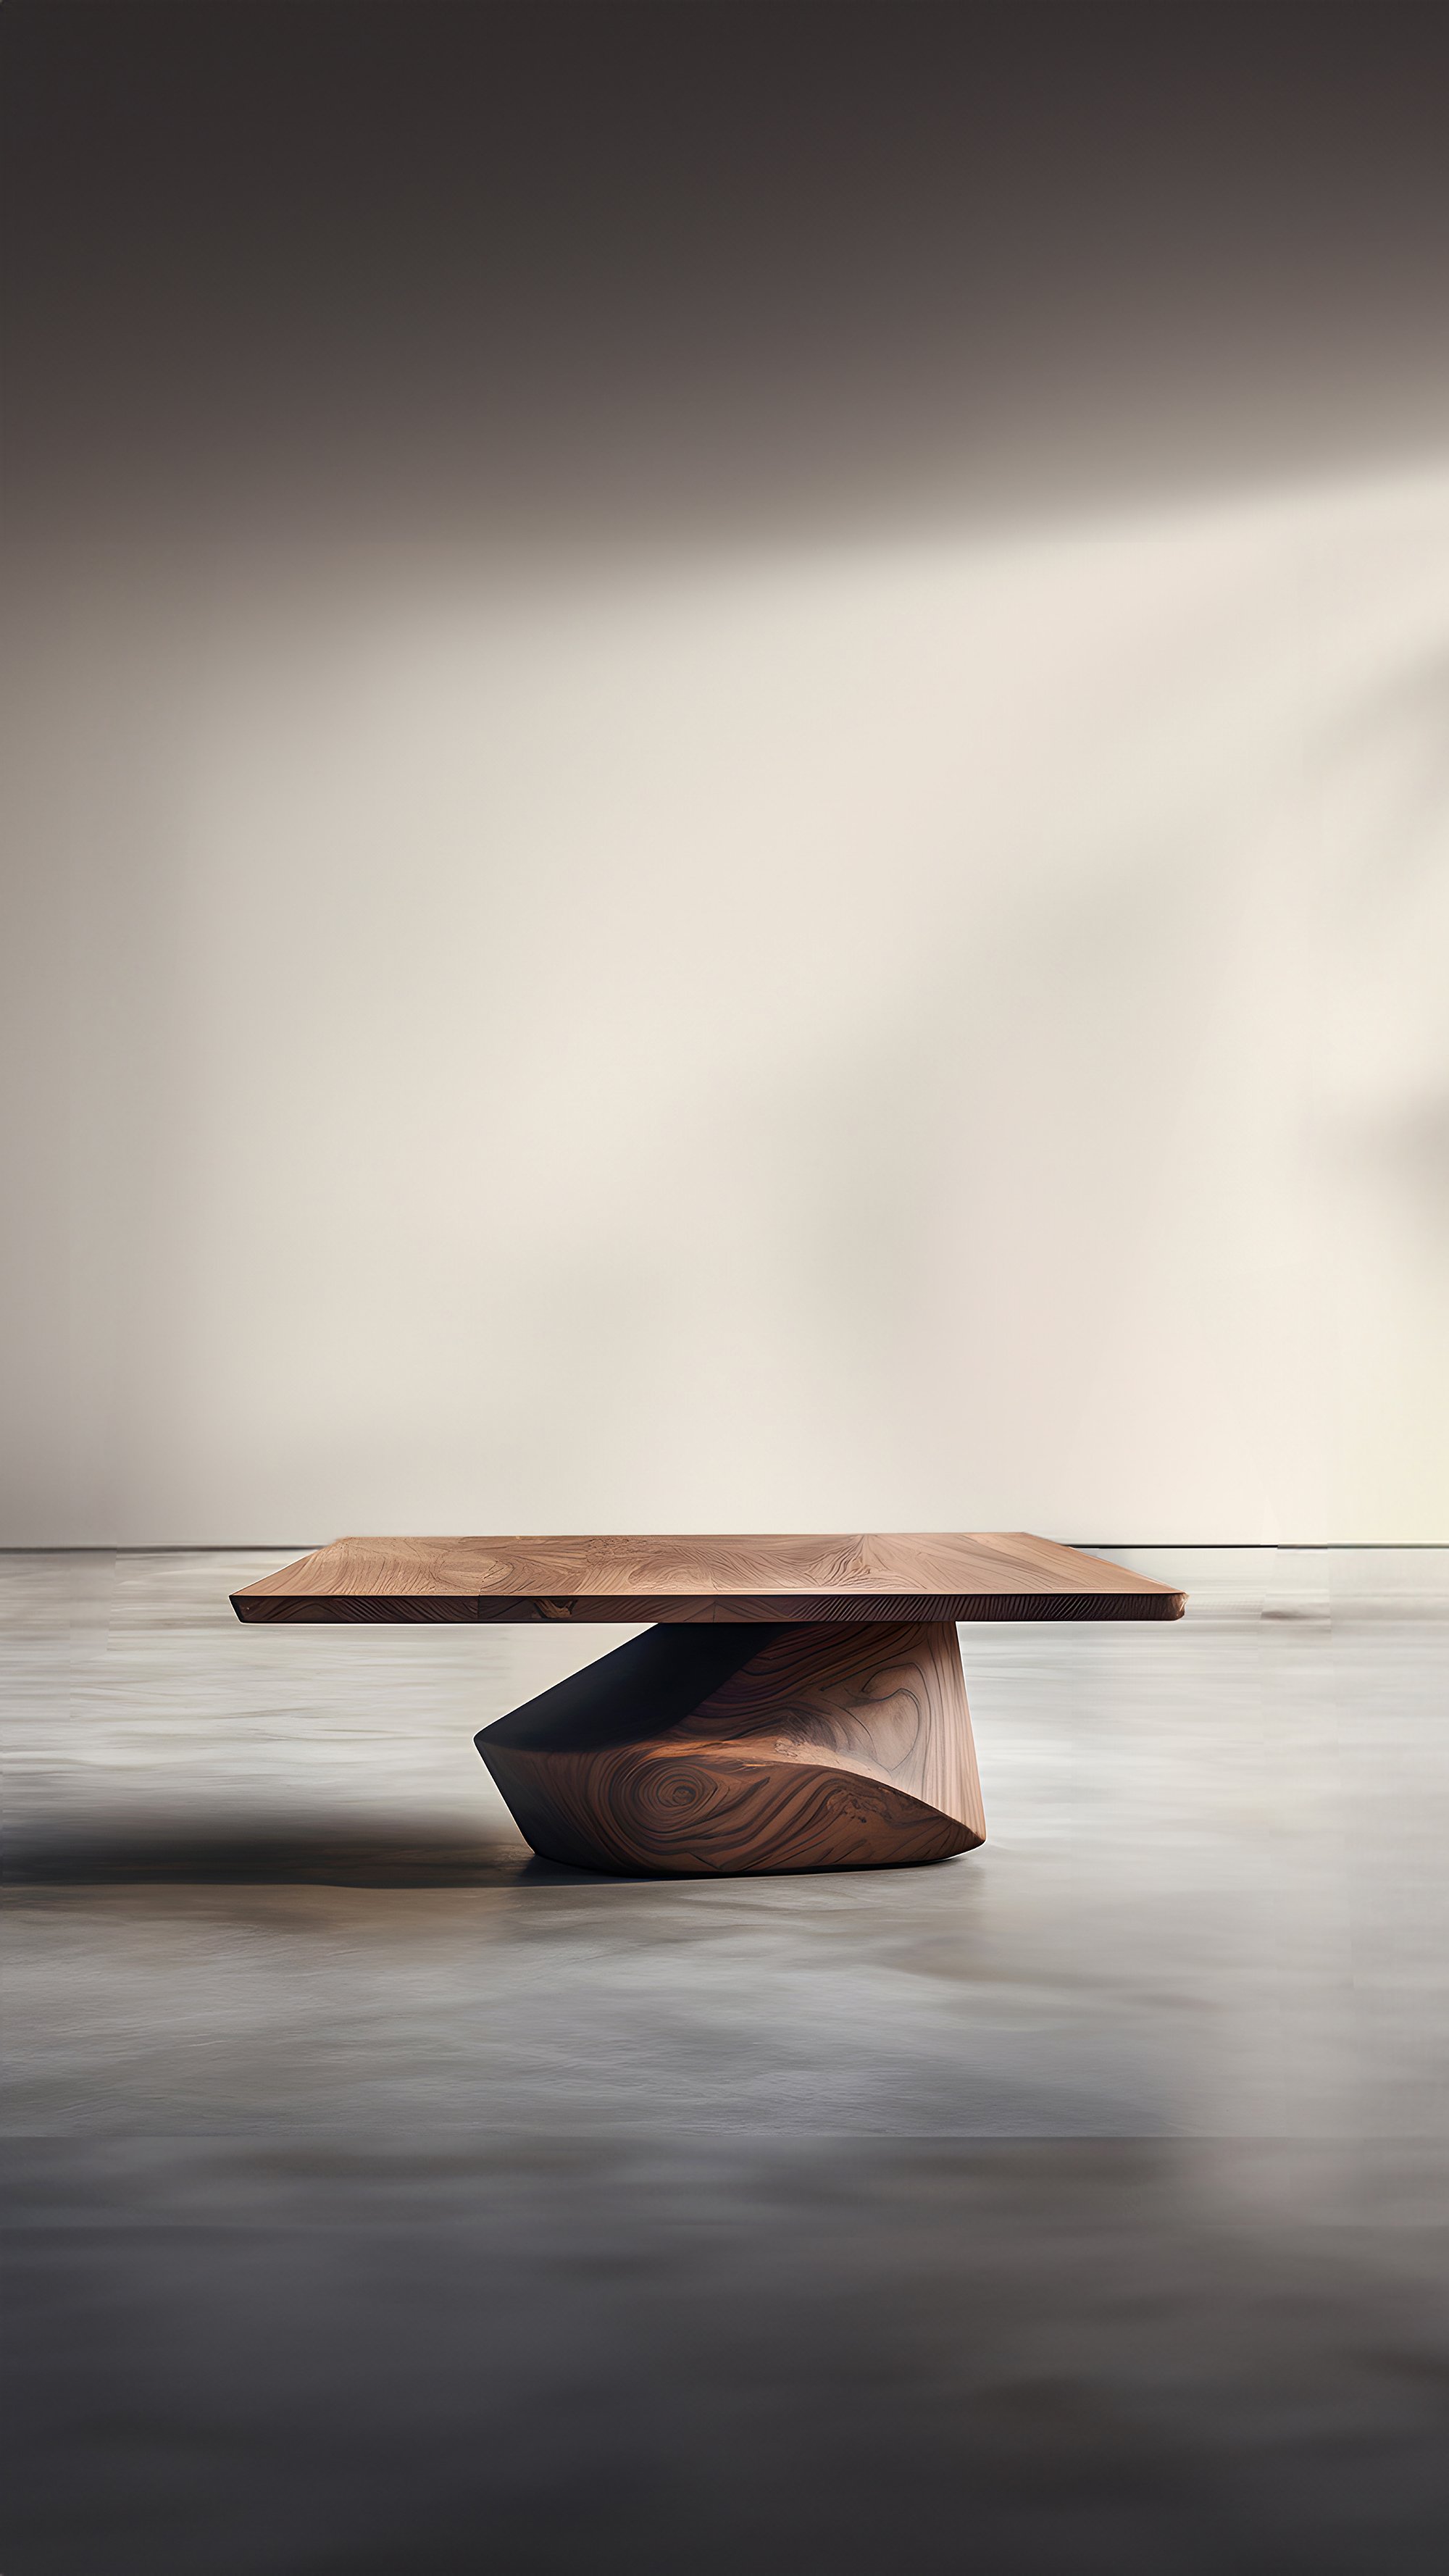 Sculptural Coffee Table Made of Solid Wood, Center Table Solace S34 by Joel Escalona — 8.jpg